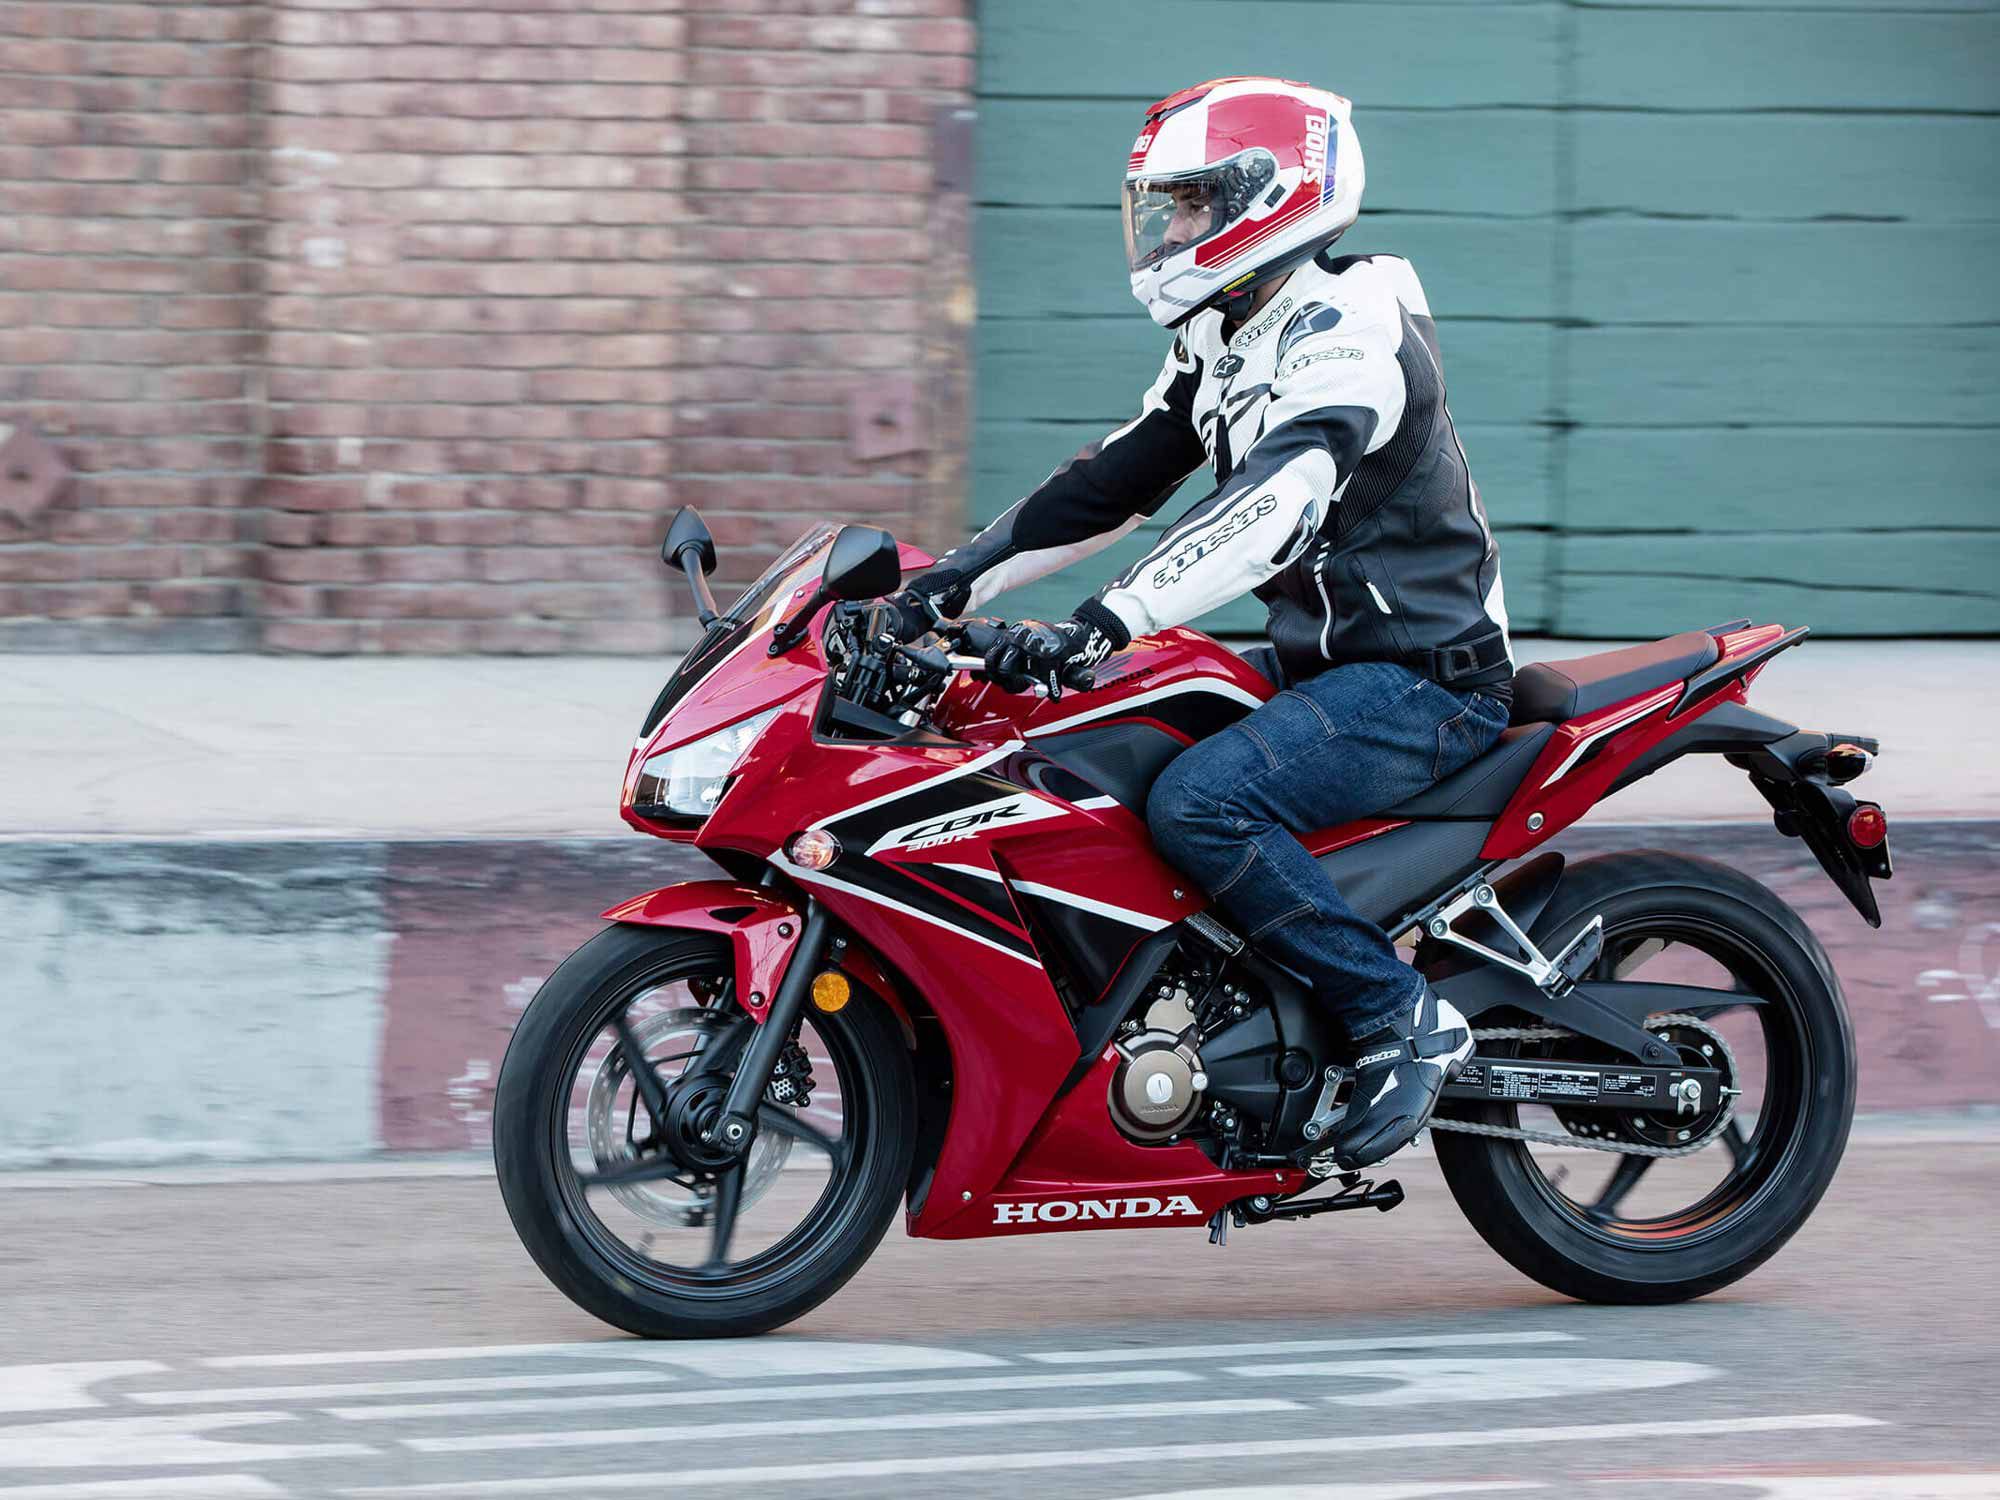 Relaxed and neutral ergos make the CBR300R a relatively comfortable bike to commute on.